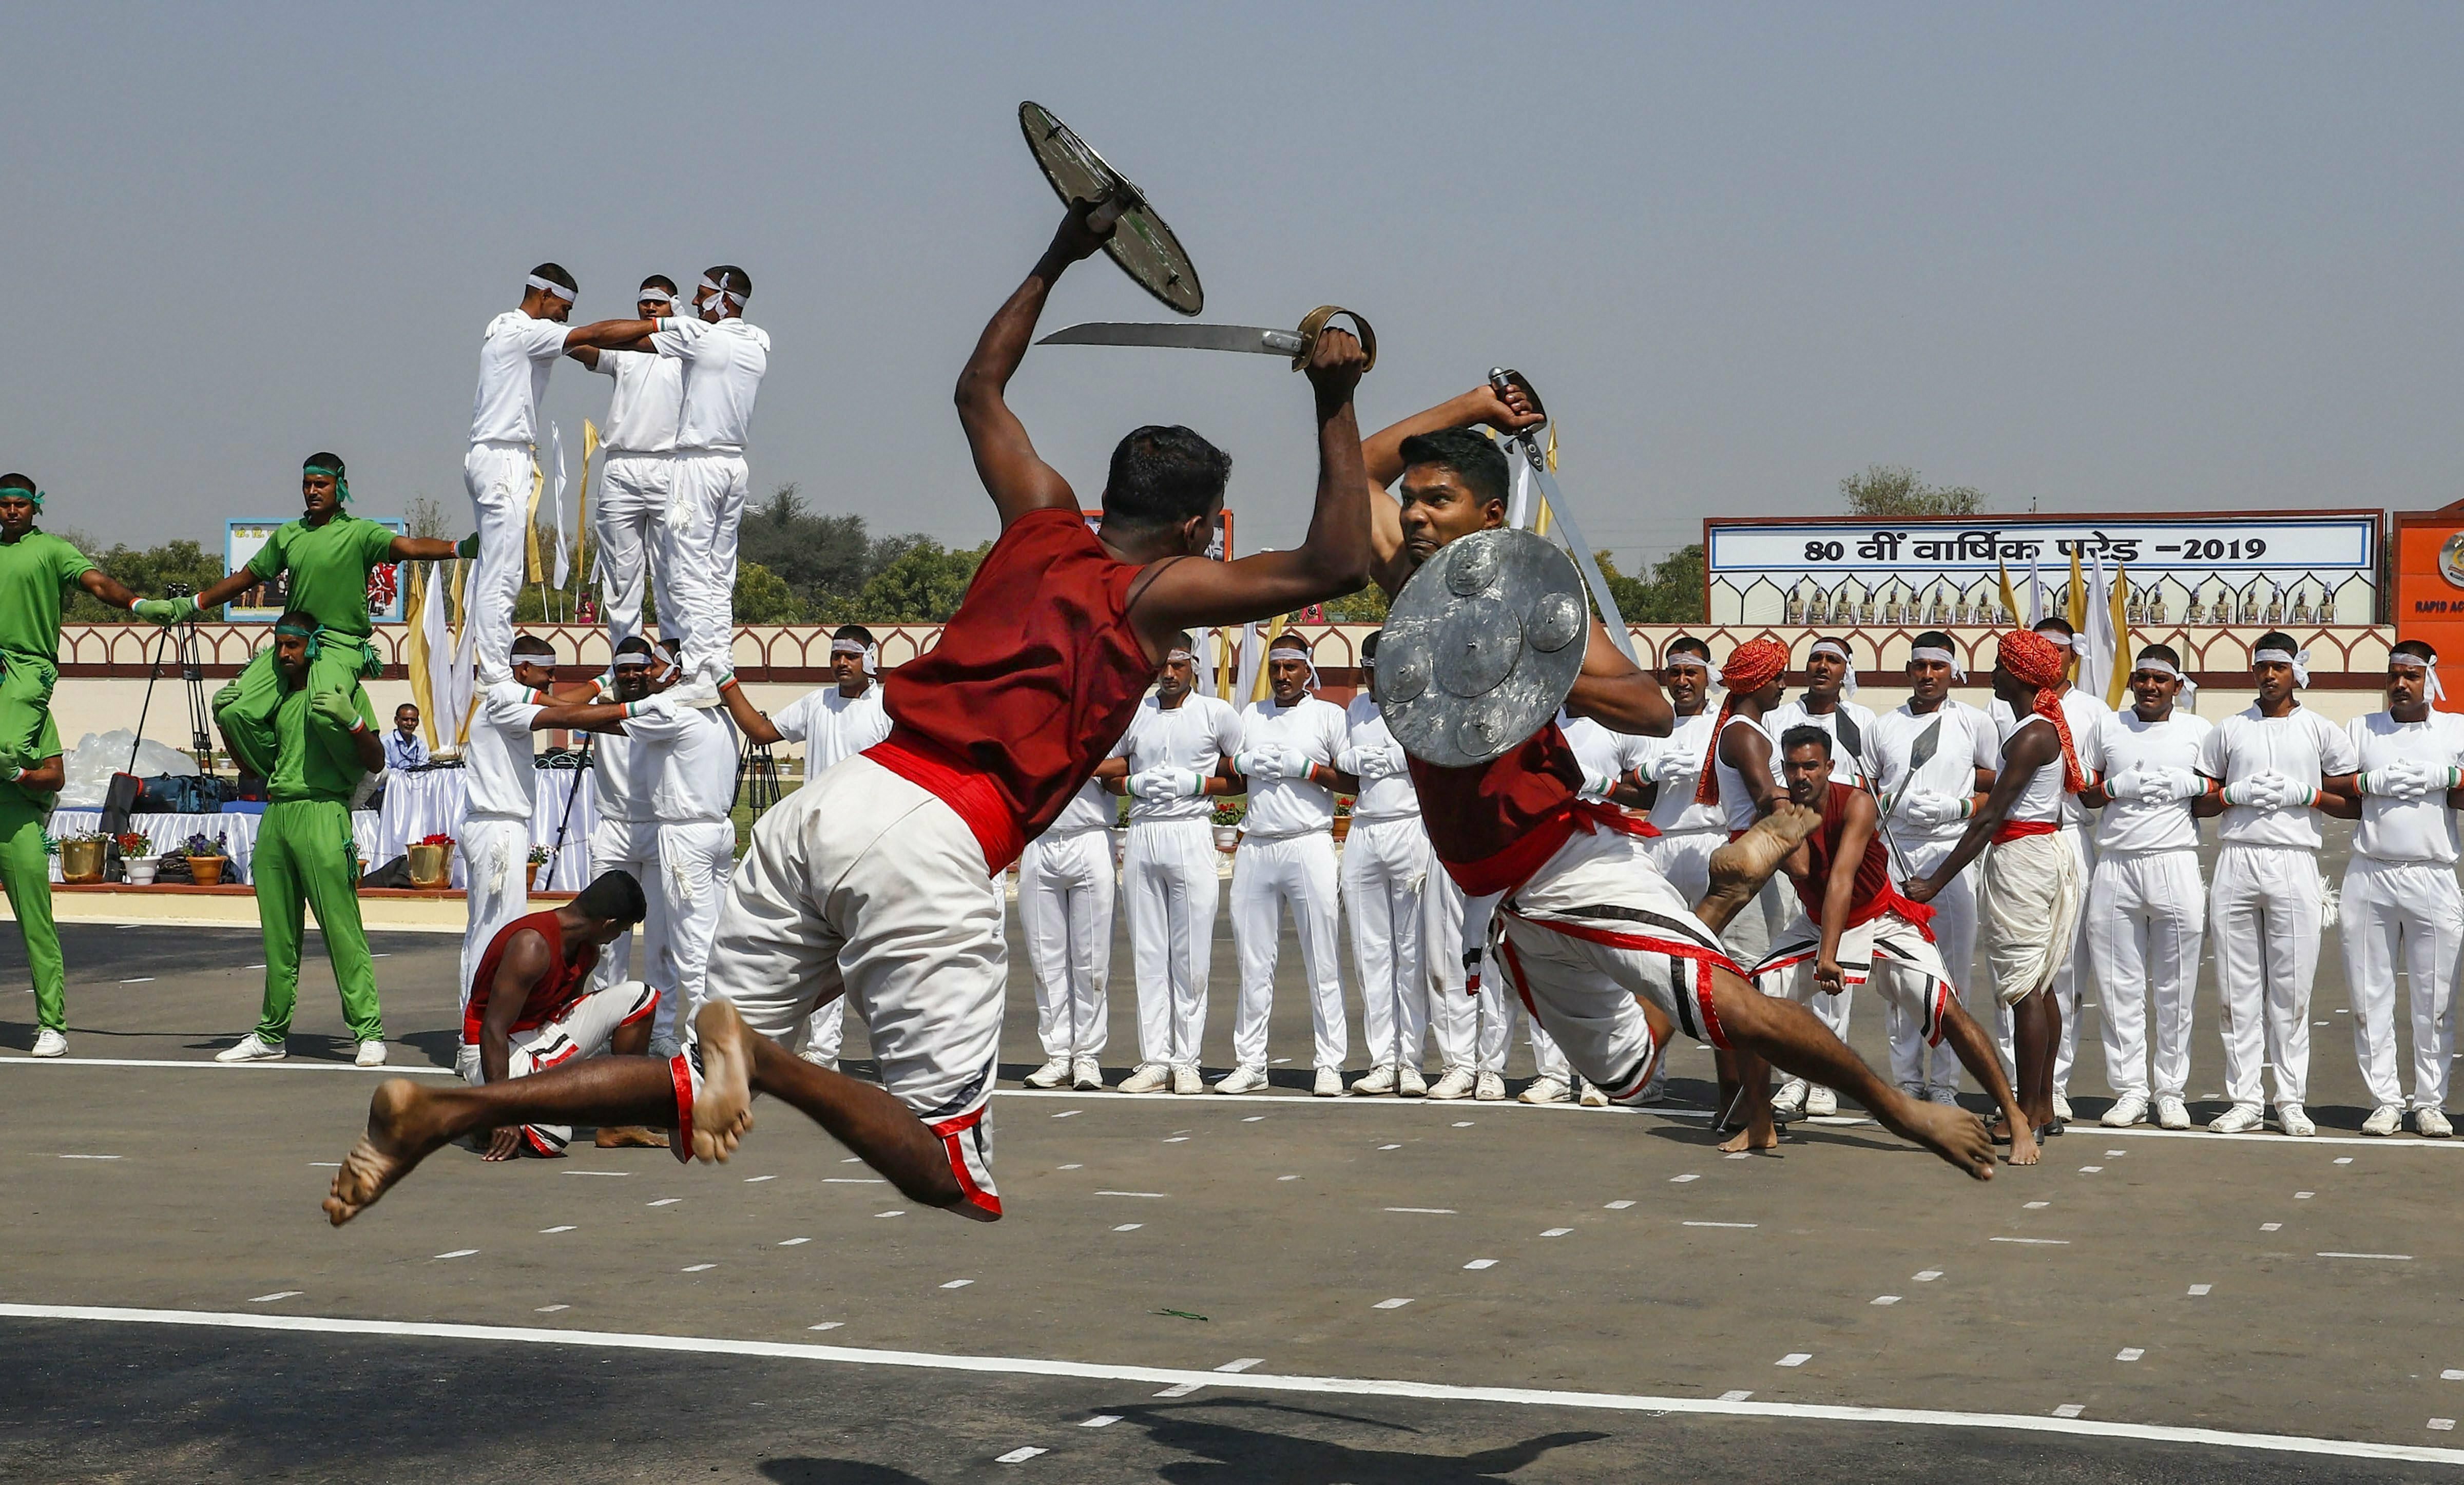 CRPF personnel perform Kalaripayattu, a traditional Indian martial art, during the 80th raising day of the Central Reserve Police Force (CRPF) in Gurugram - PTI